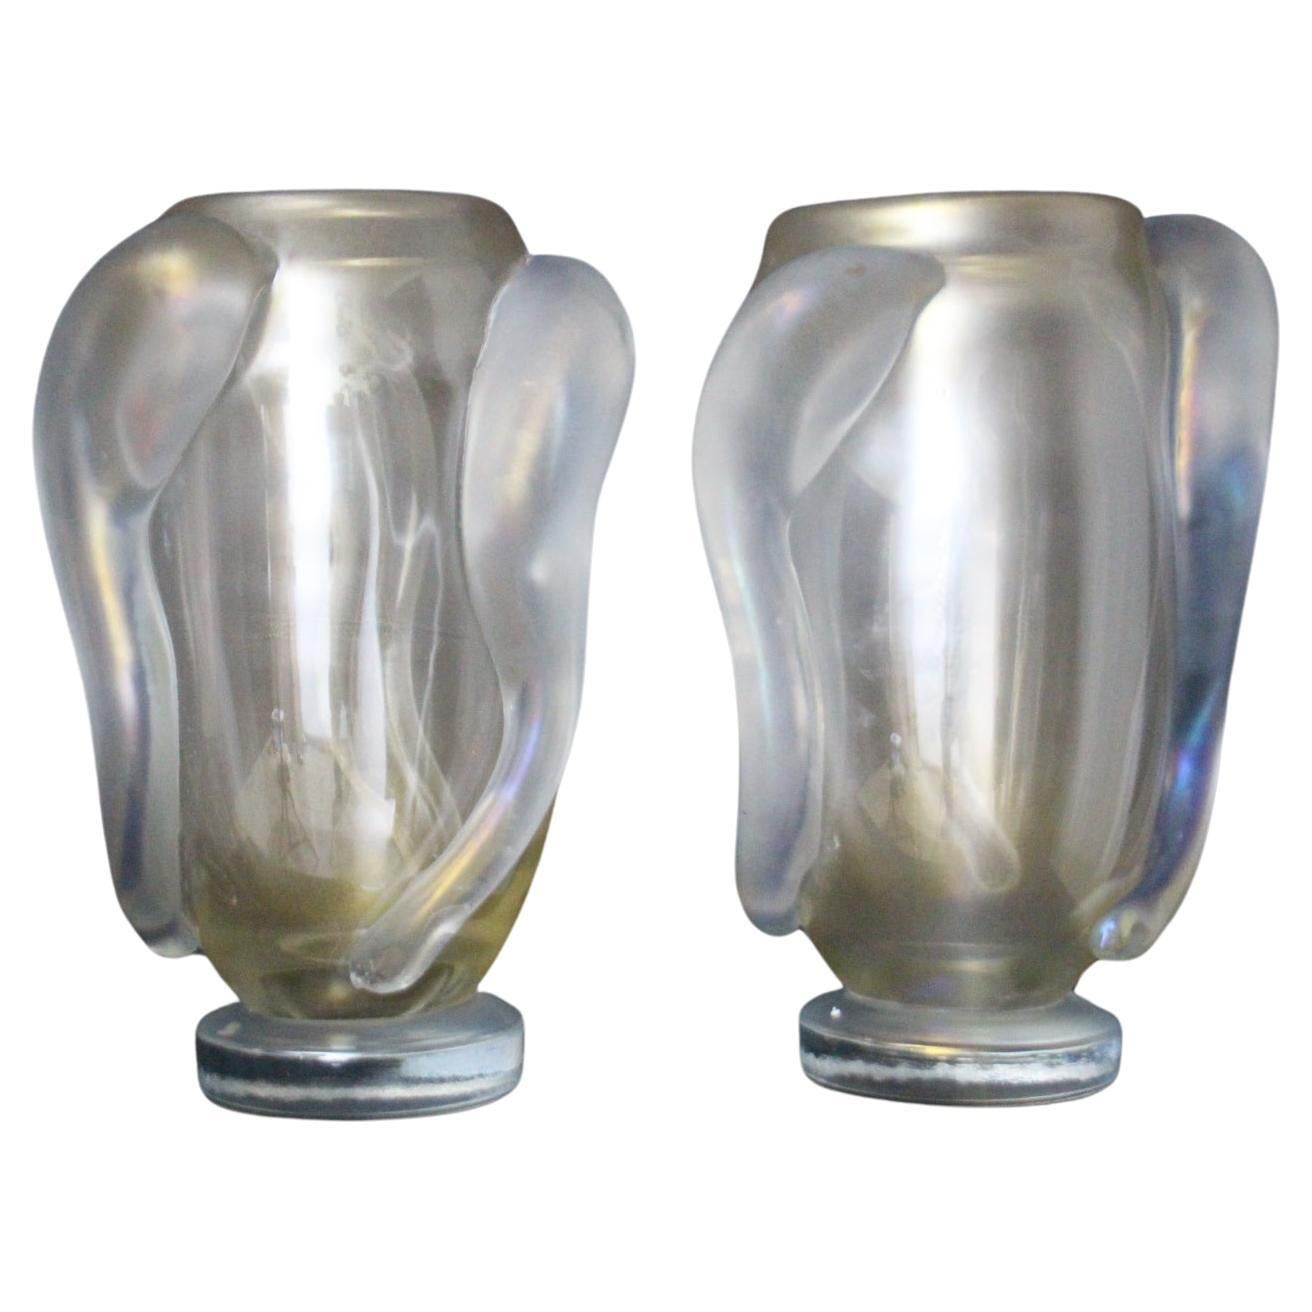 Pair of Large Iridescent Pearly Murano Glass Vases by Costantini